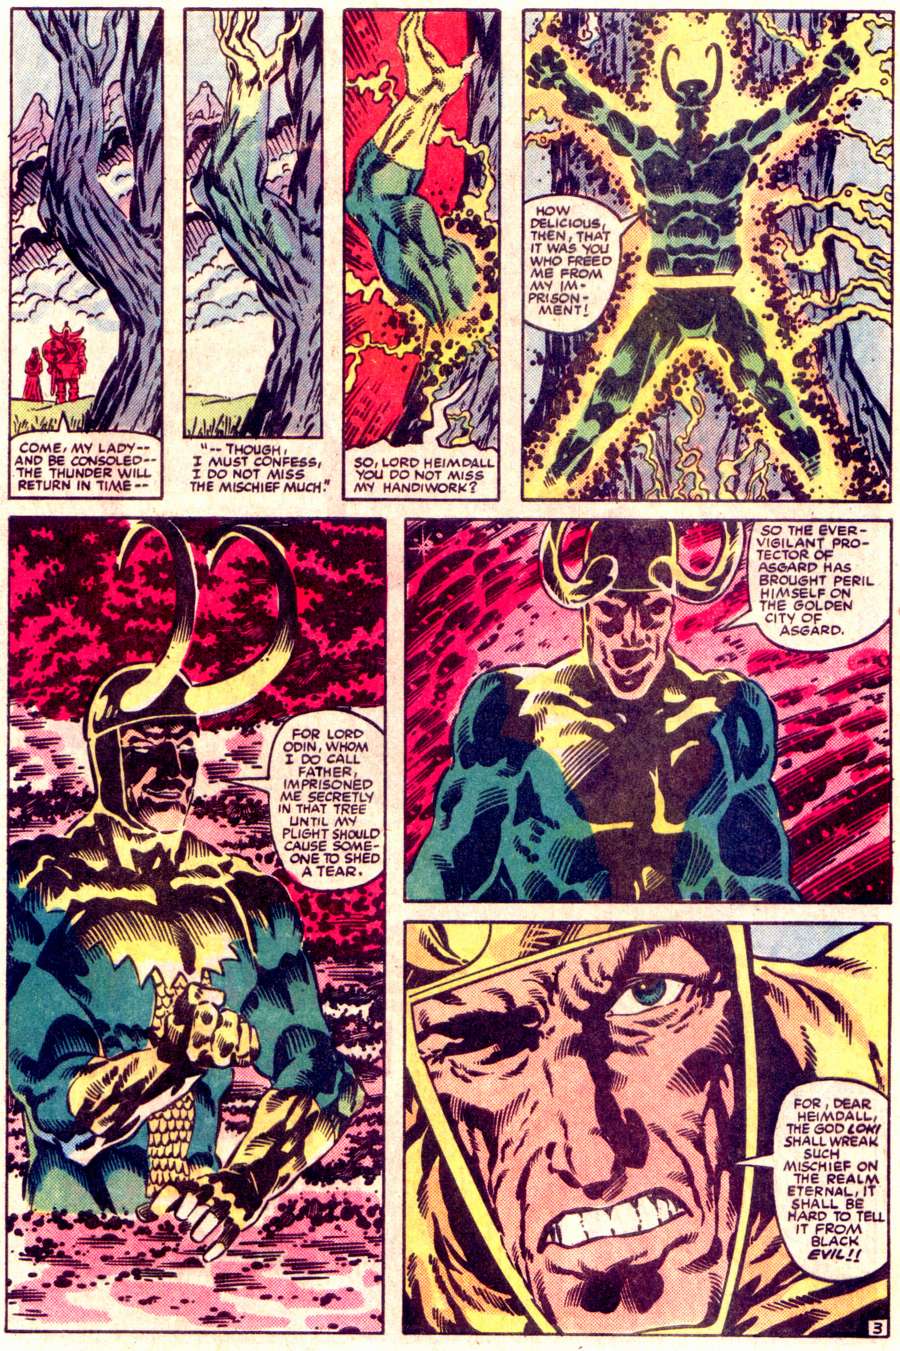 What If? (1977) issue 47 - Loki had found The hammer of Thor - Page 4